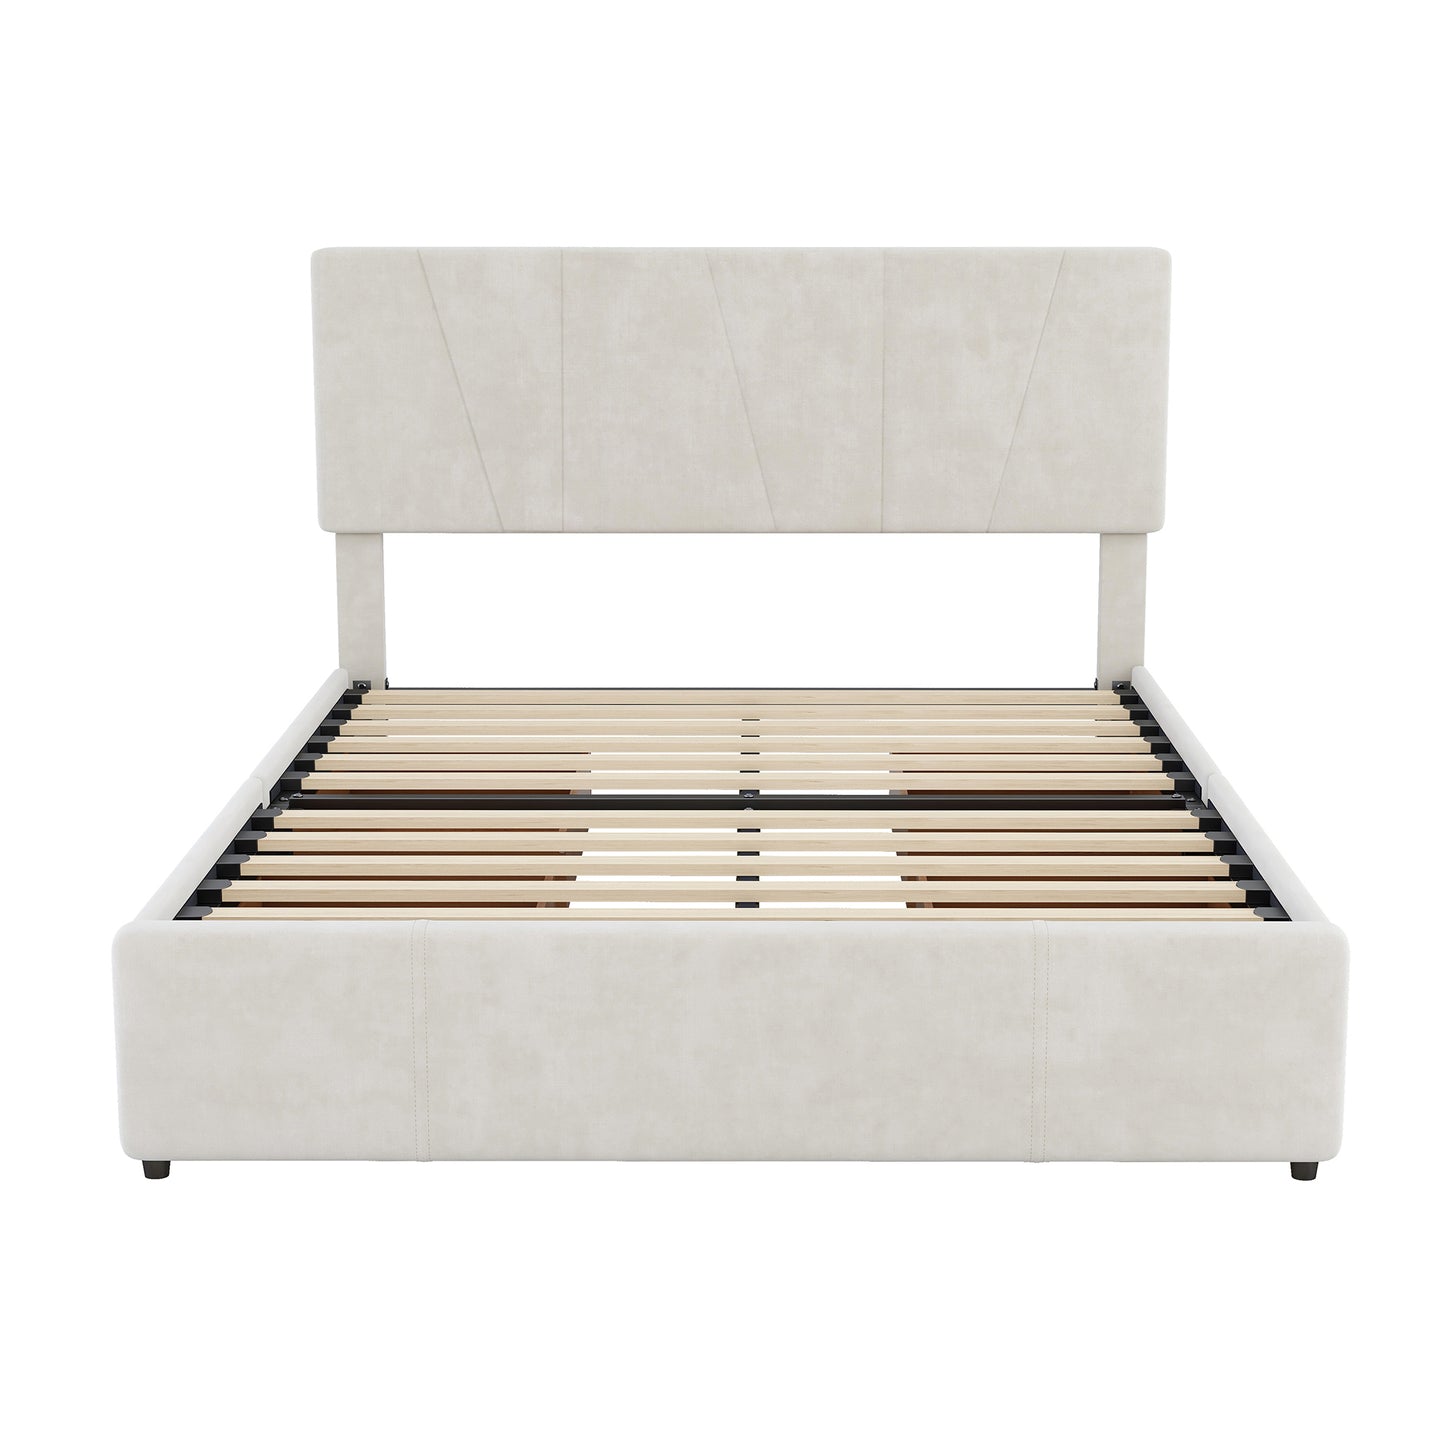 Full Size Upholstery Platform Bed with Four Drawers on Two Sides,Adjustable Headboard,Beige